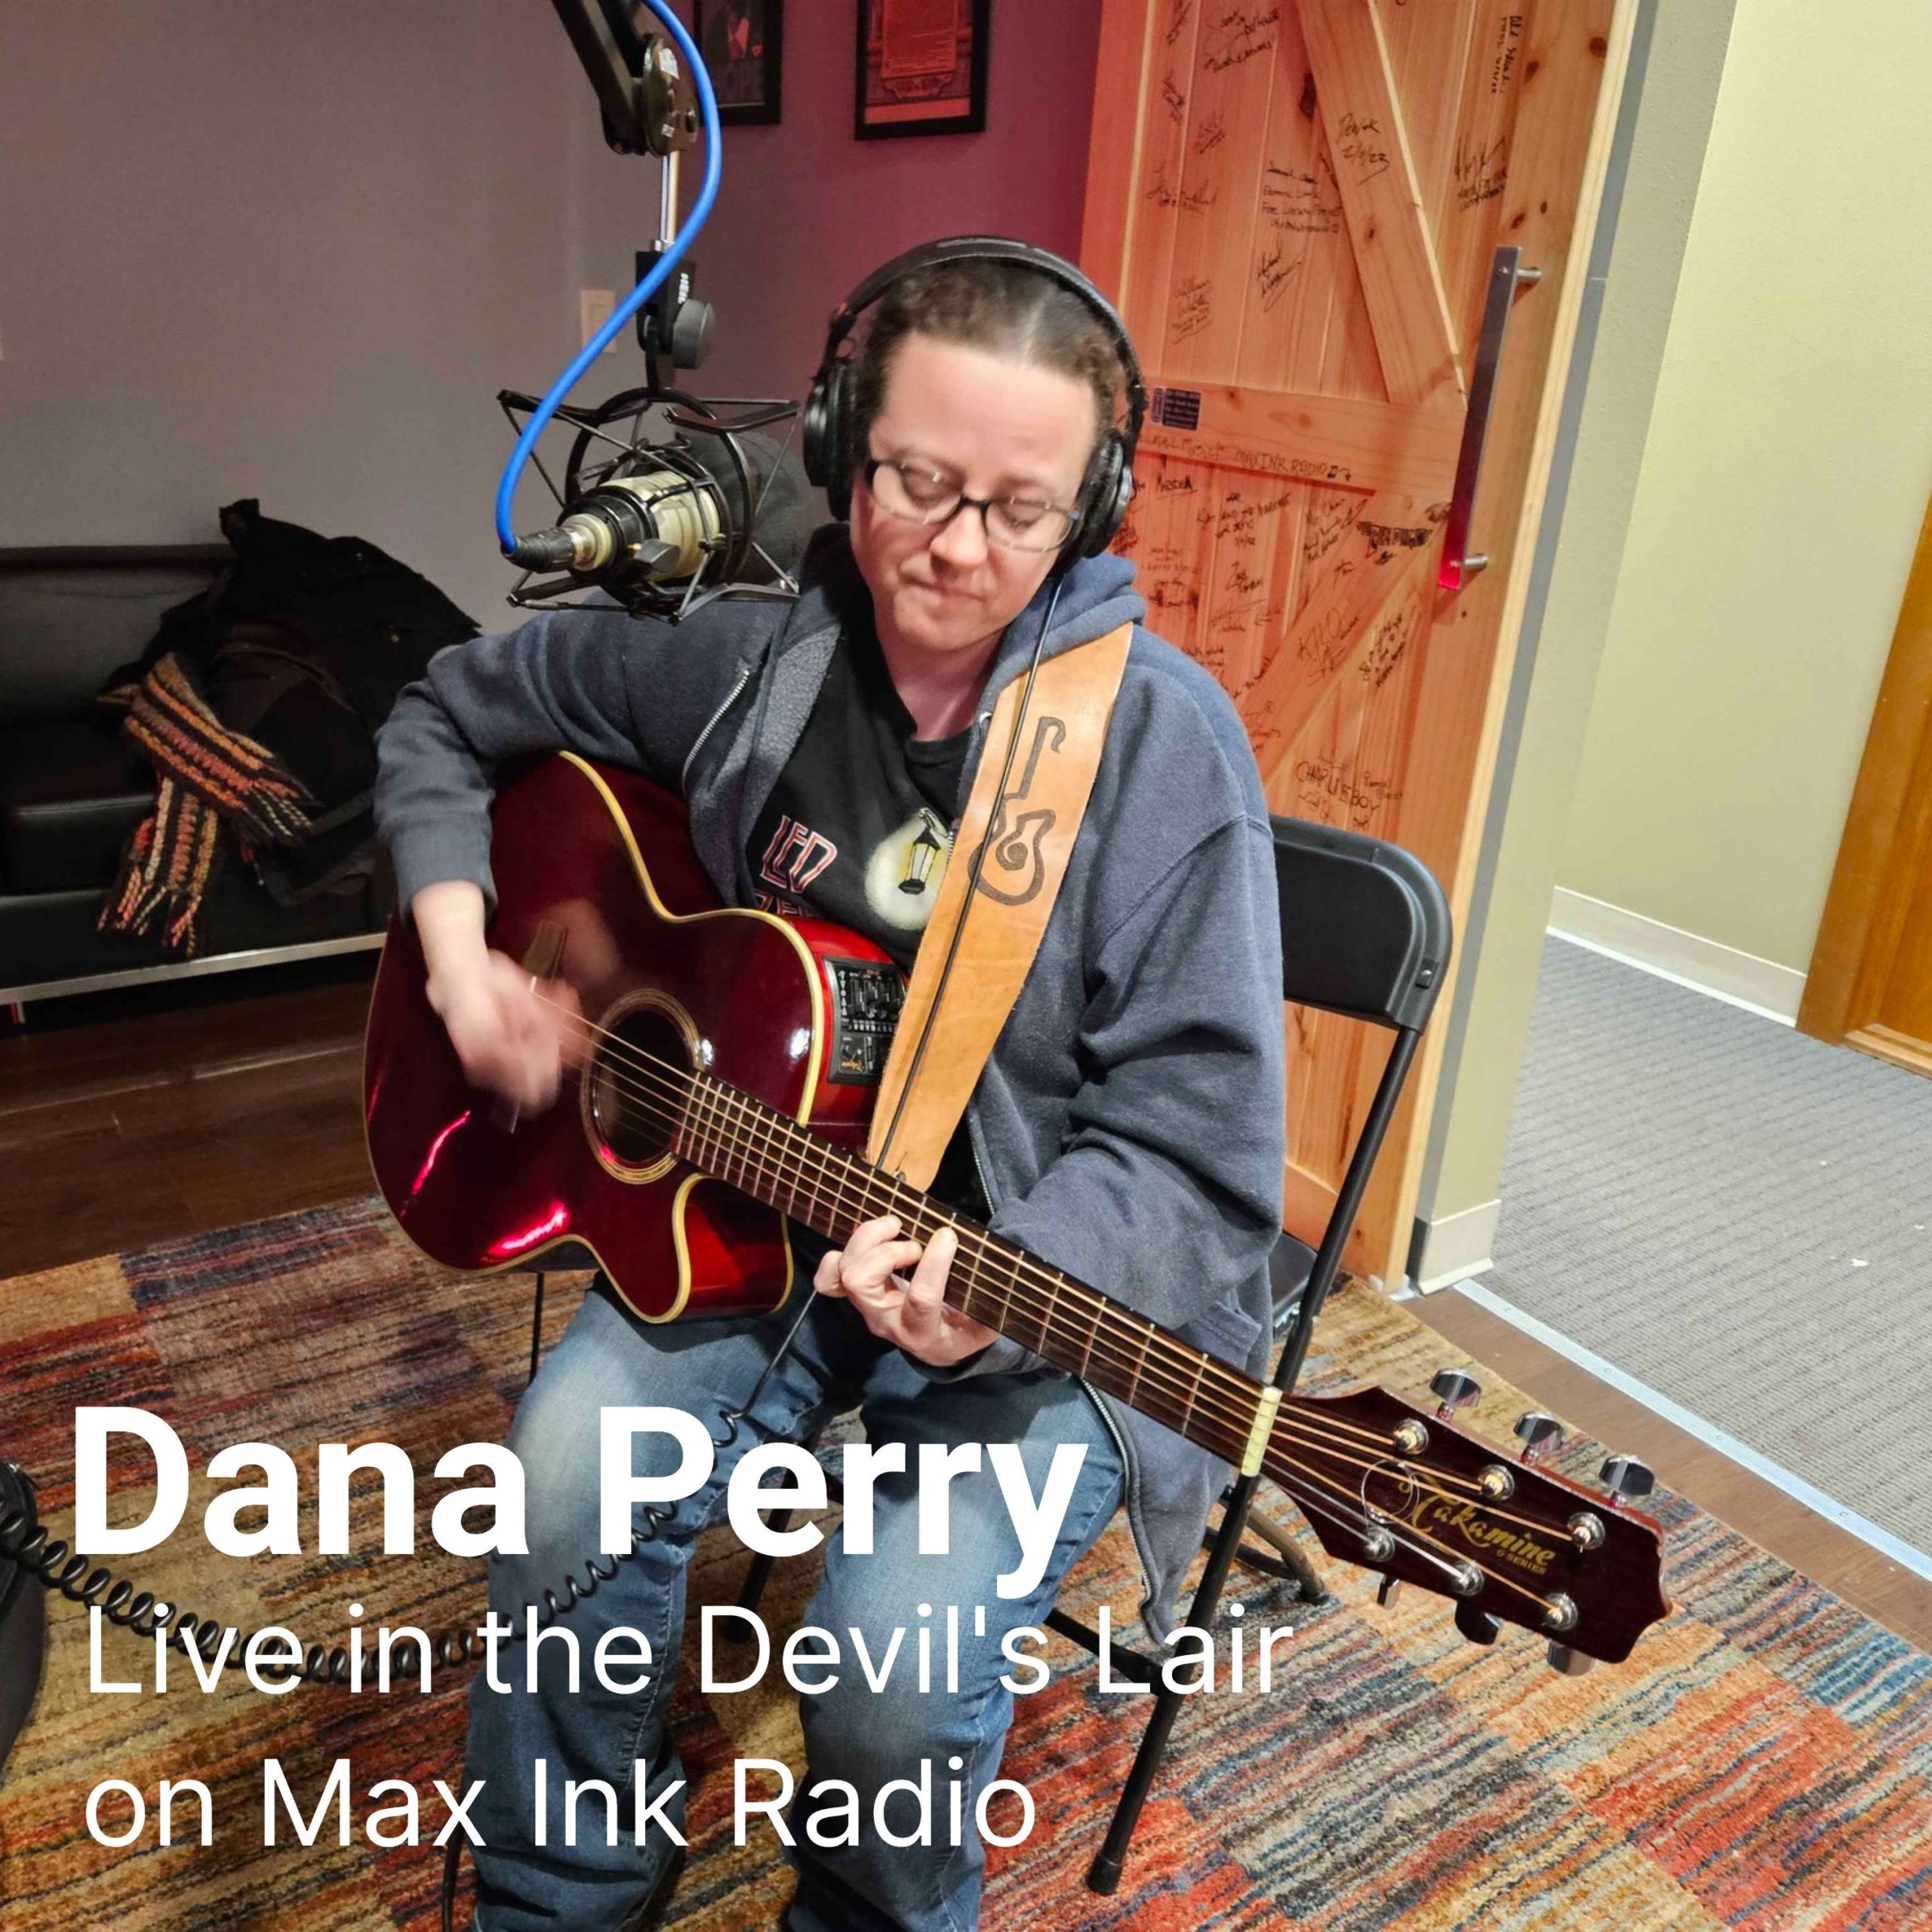 Dana Perry is Live in the Devil's Lair